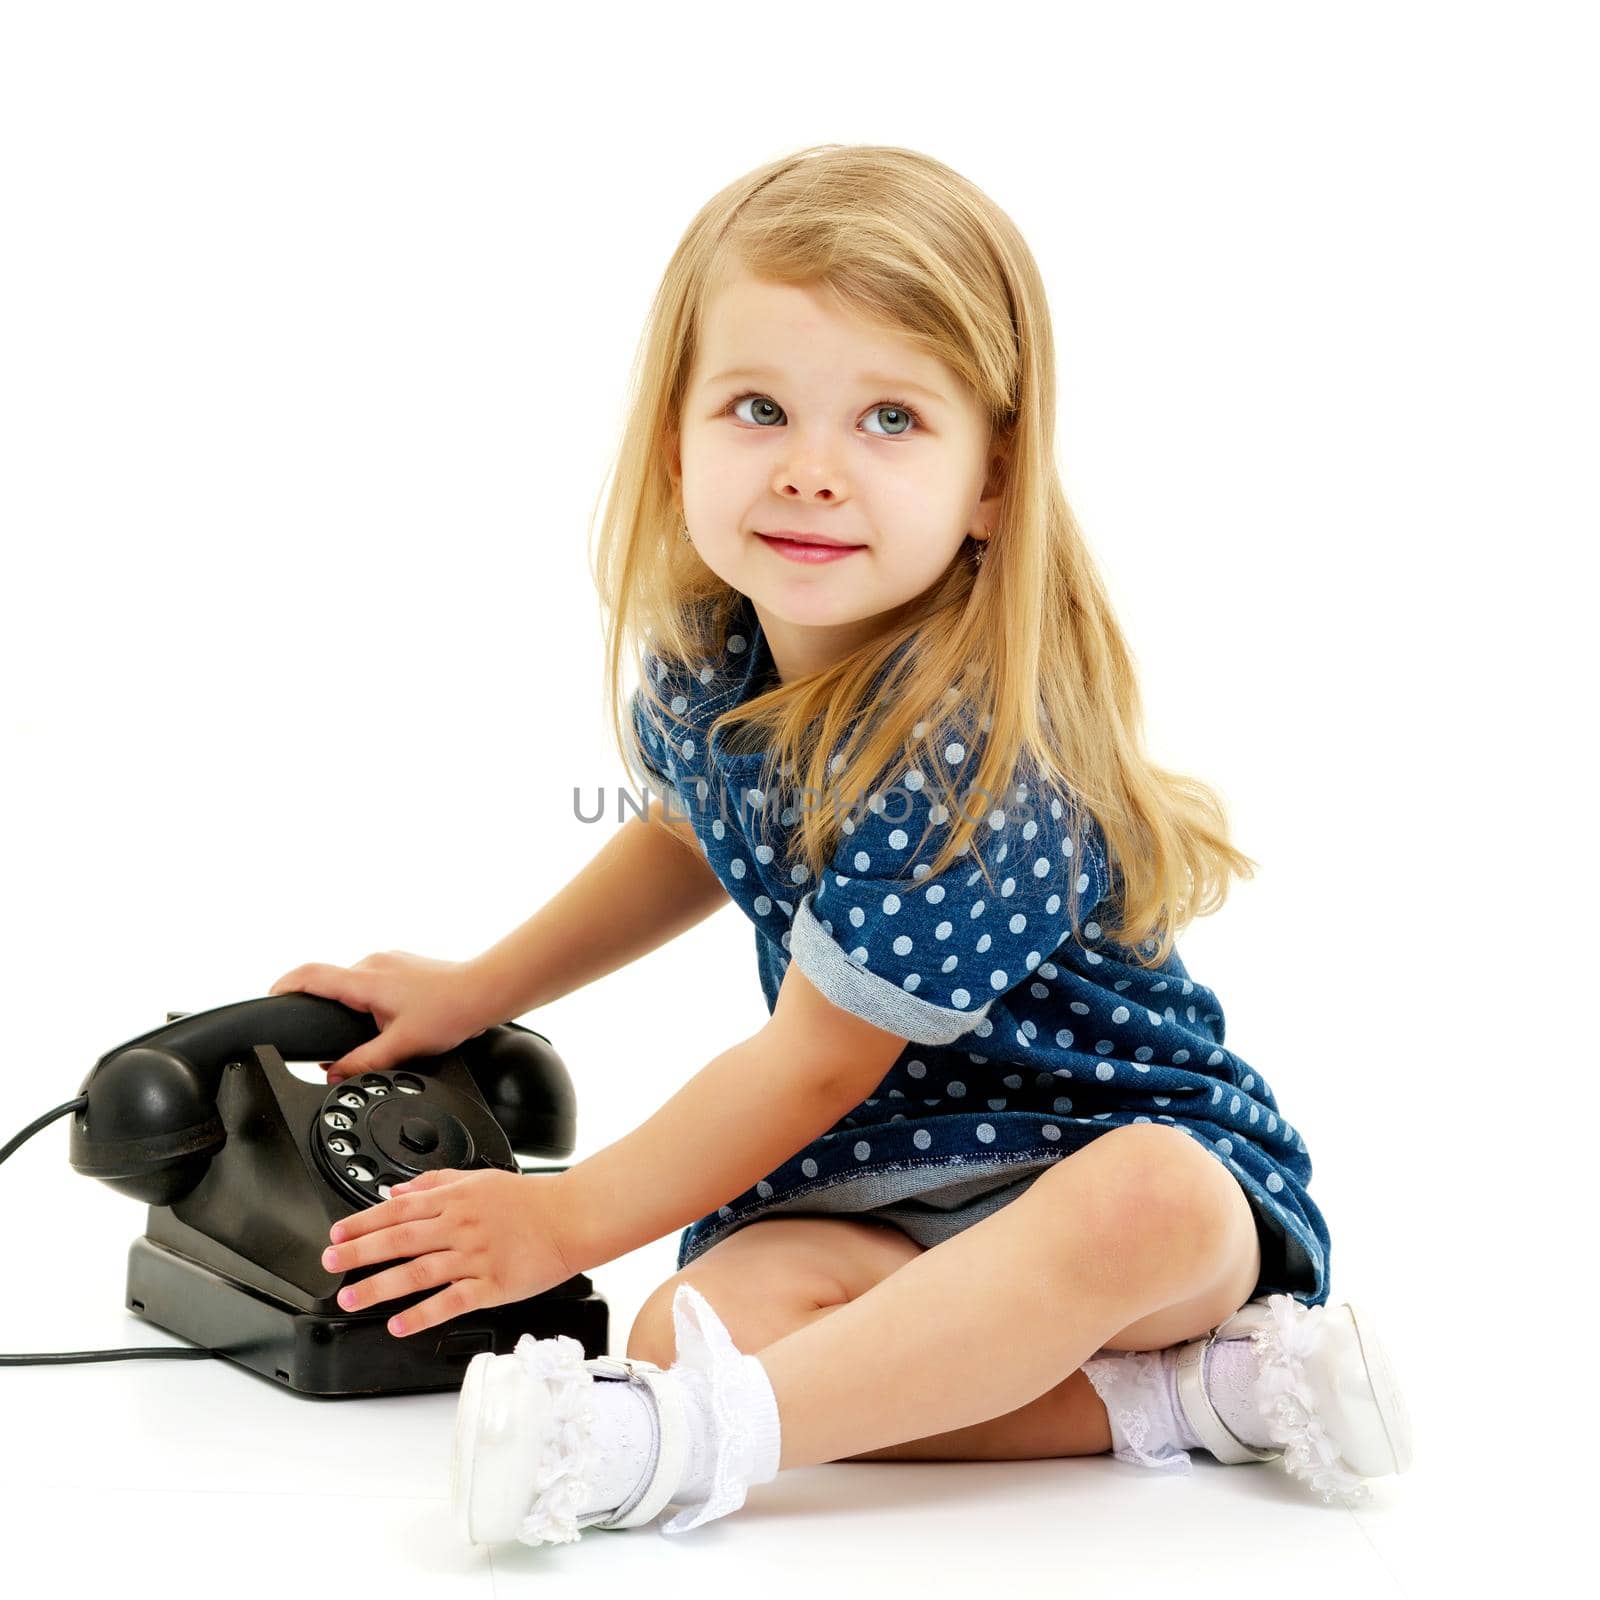 Cute little girl playing with an old phone. Concept retro, nostalgia. Isolated on white background.